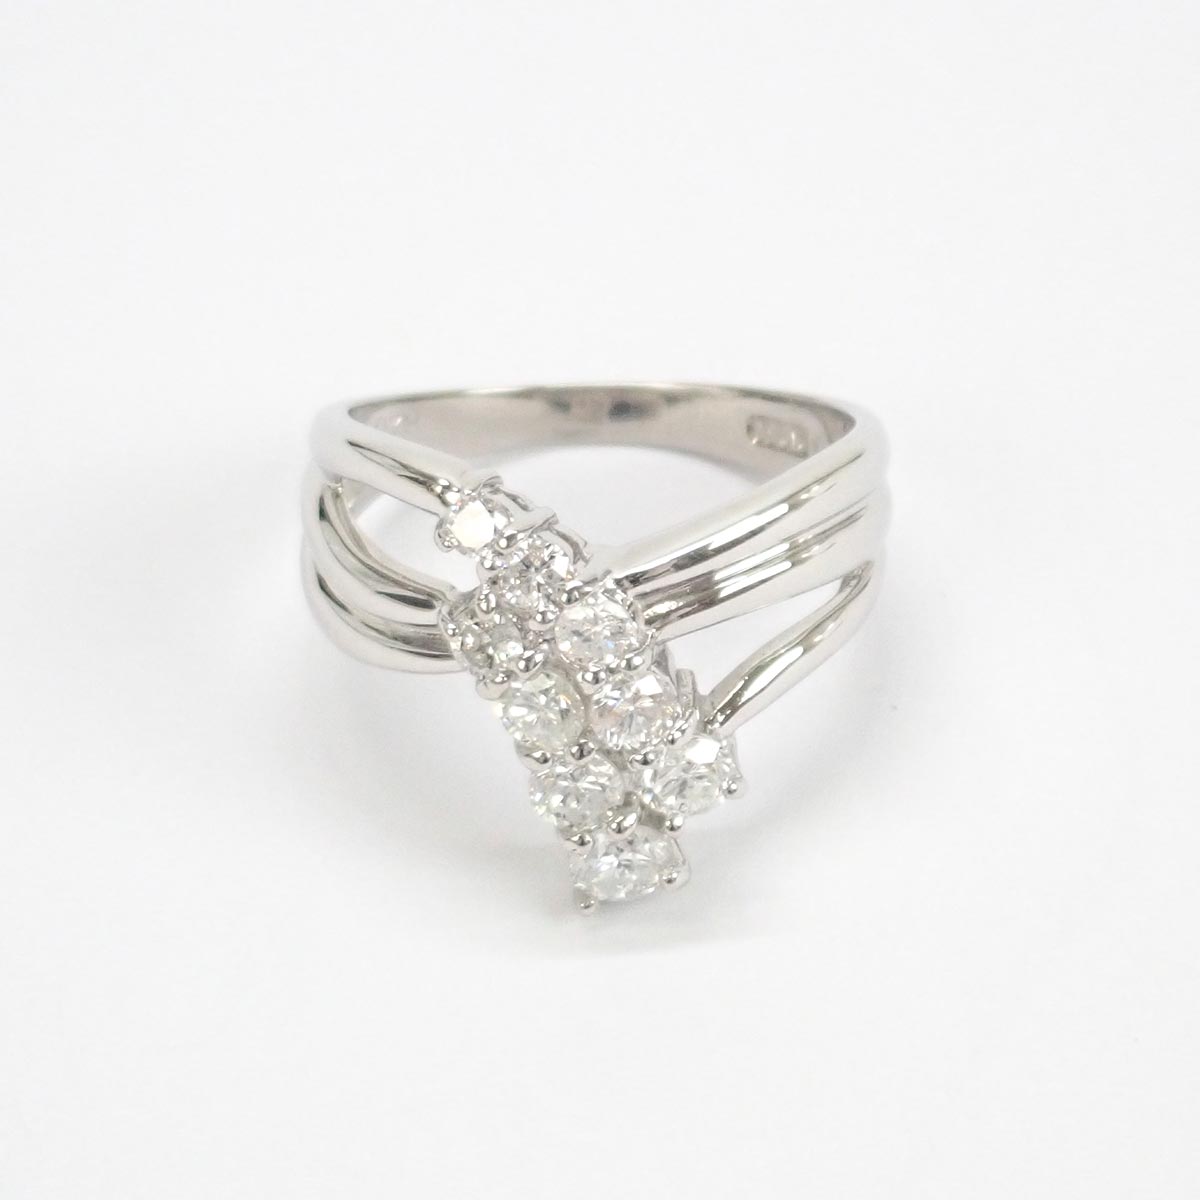 Unique Pt850 D0.79ct, approx. Gauge 11.5 Ring - Platinum PM850 with Diamond, 11.5 Silver For Women【Pre-Owned】